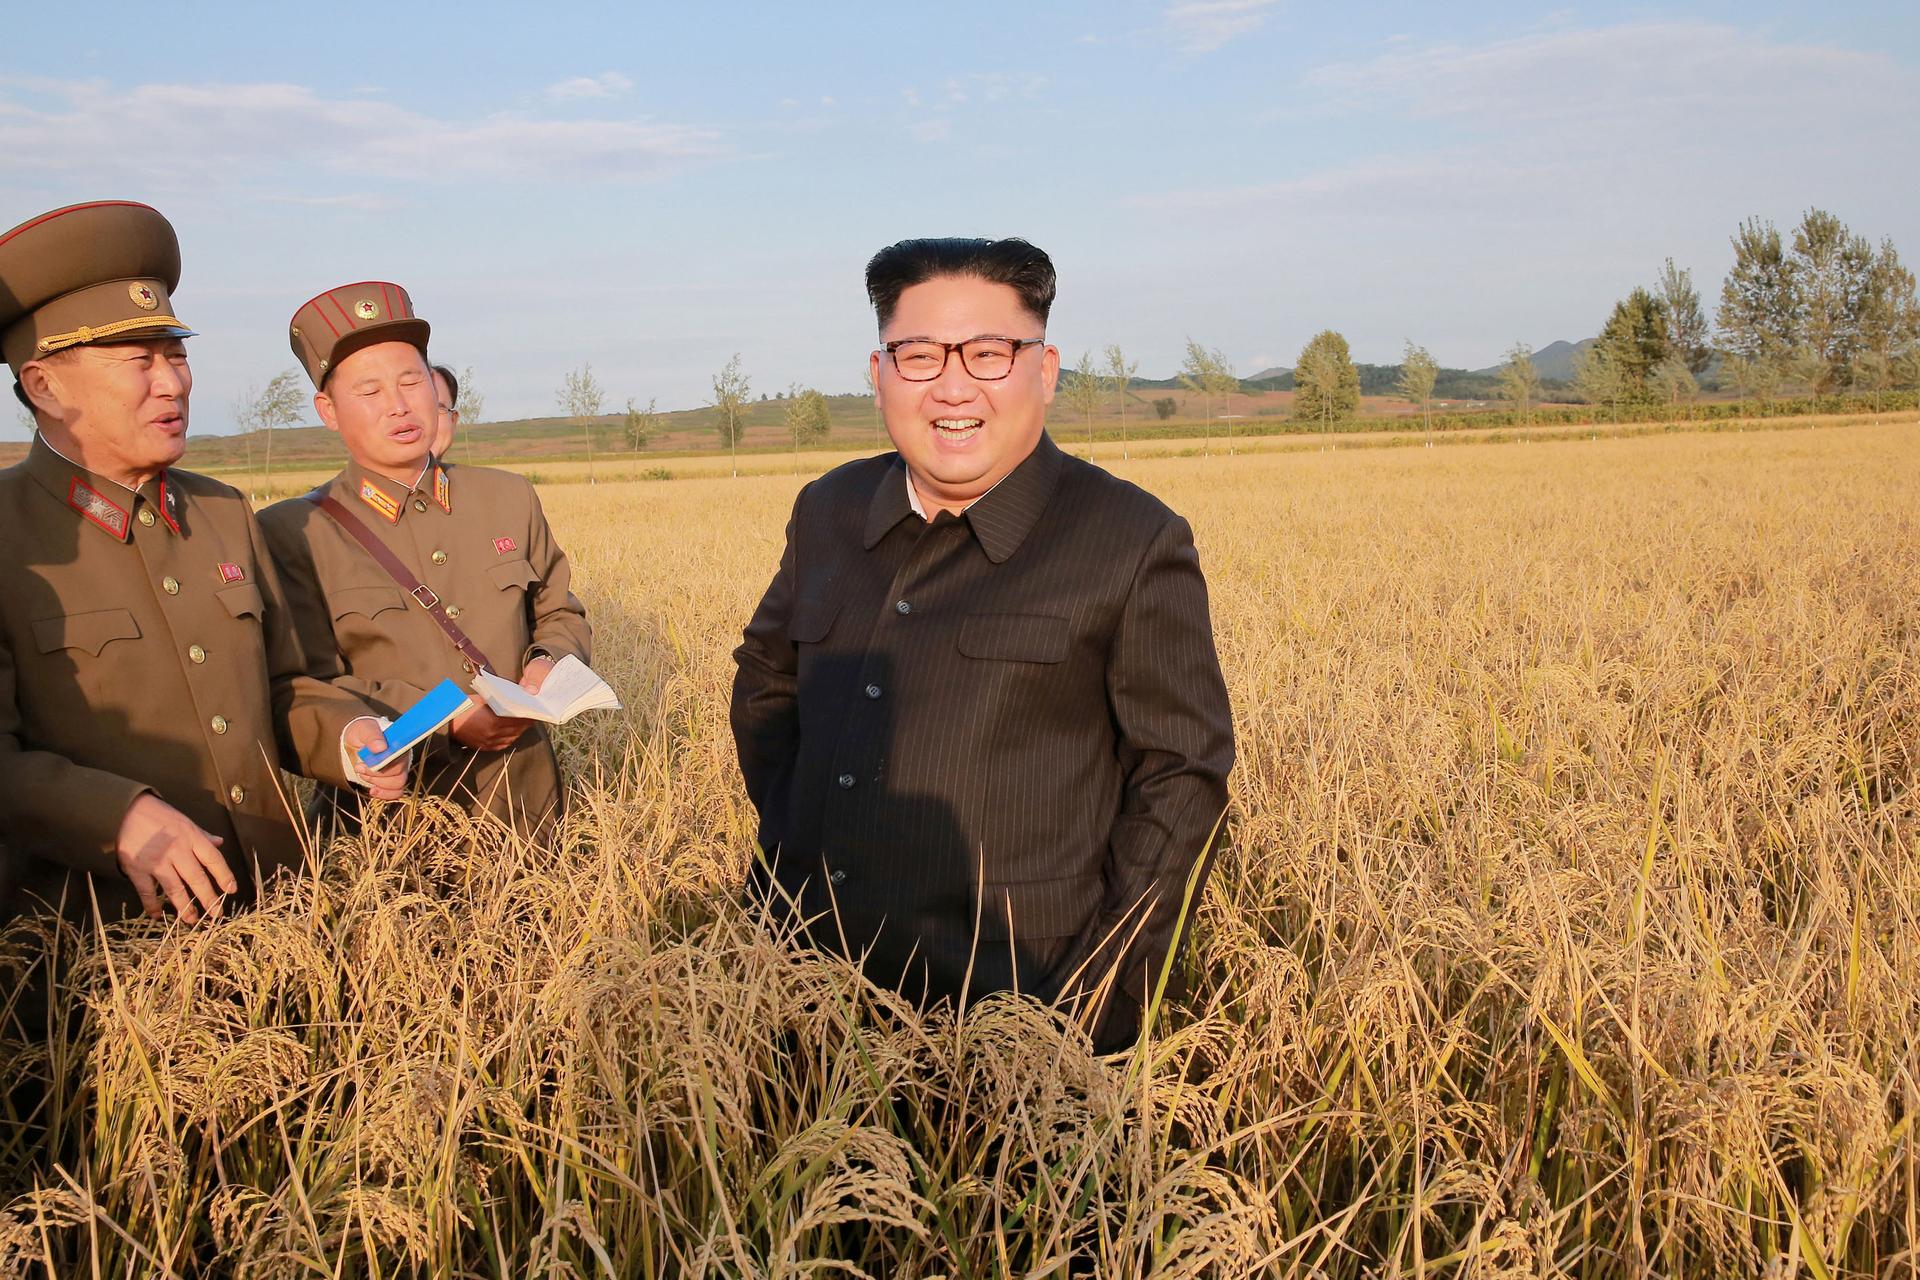 North Korean leader Kim Jong-un visits a farm in this Sept. 29, 2017 photo released by North Korea's Korean Central News Agency in Pyongyang.